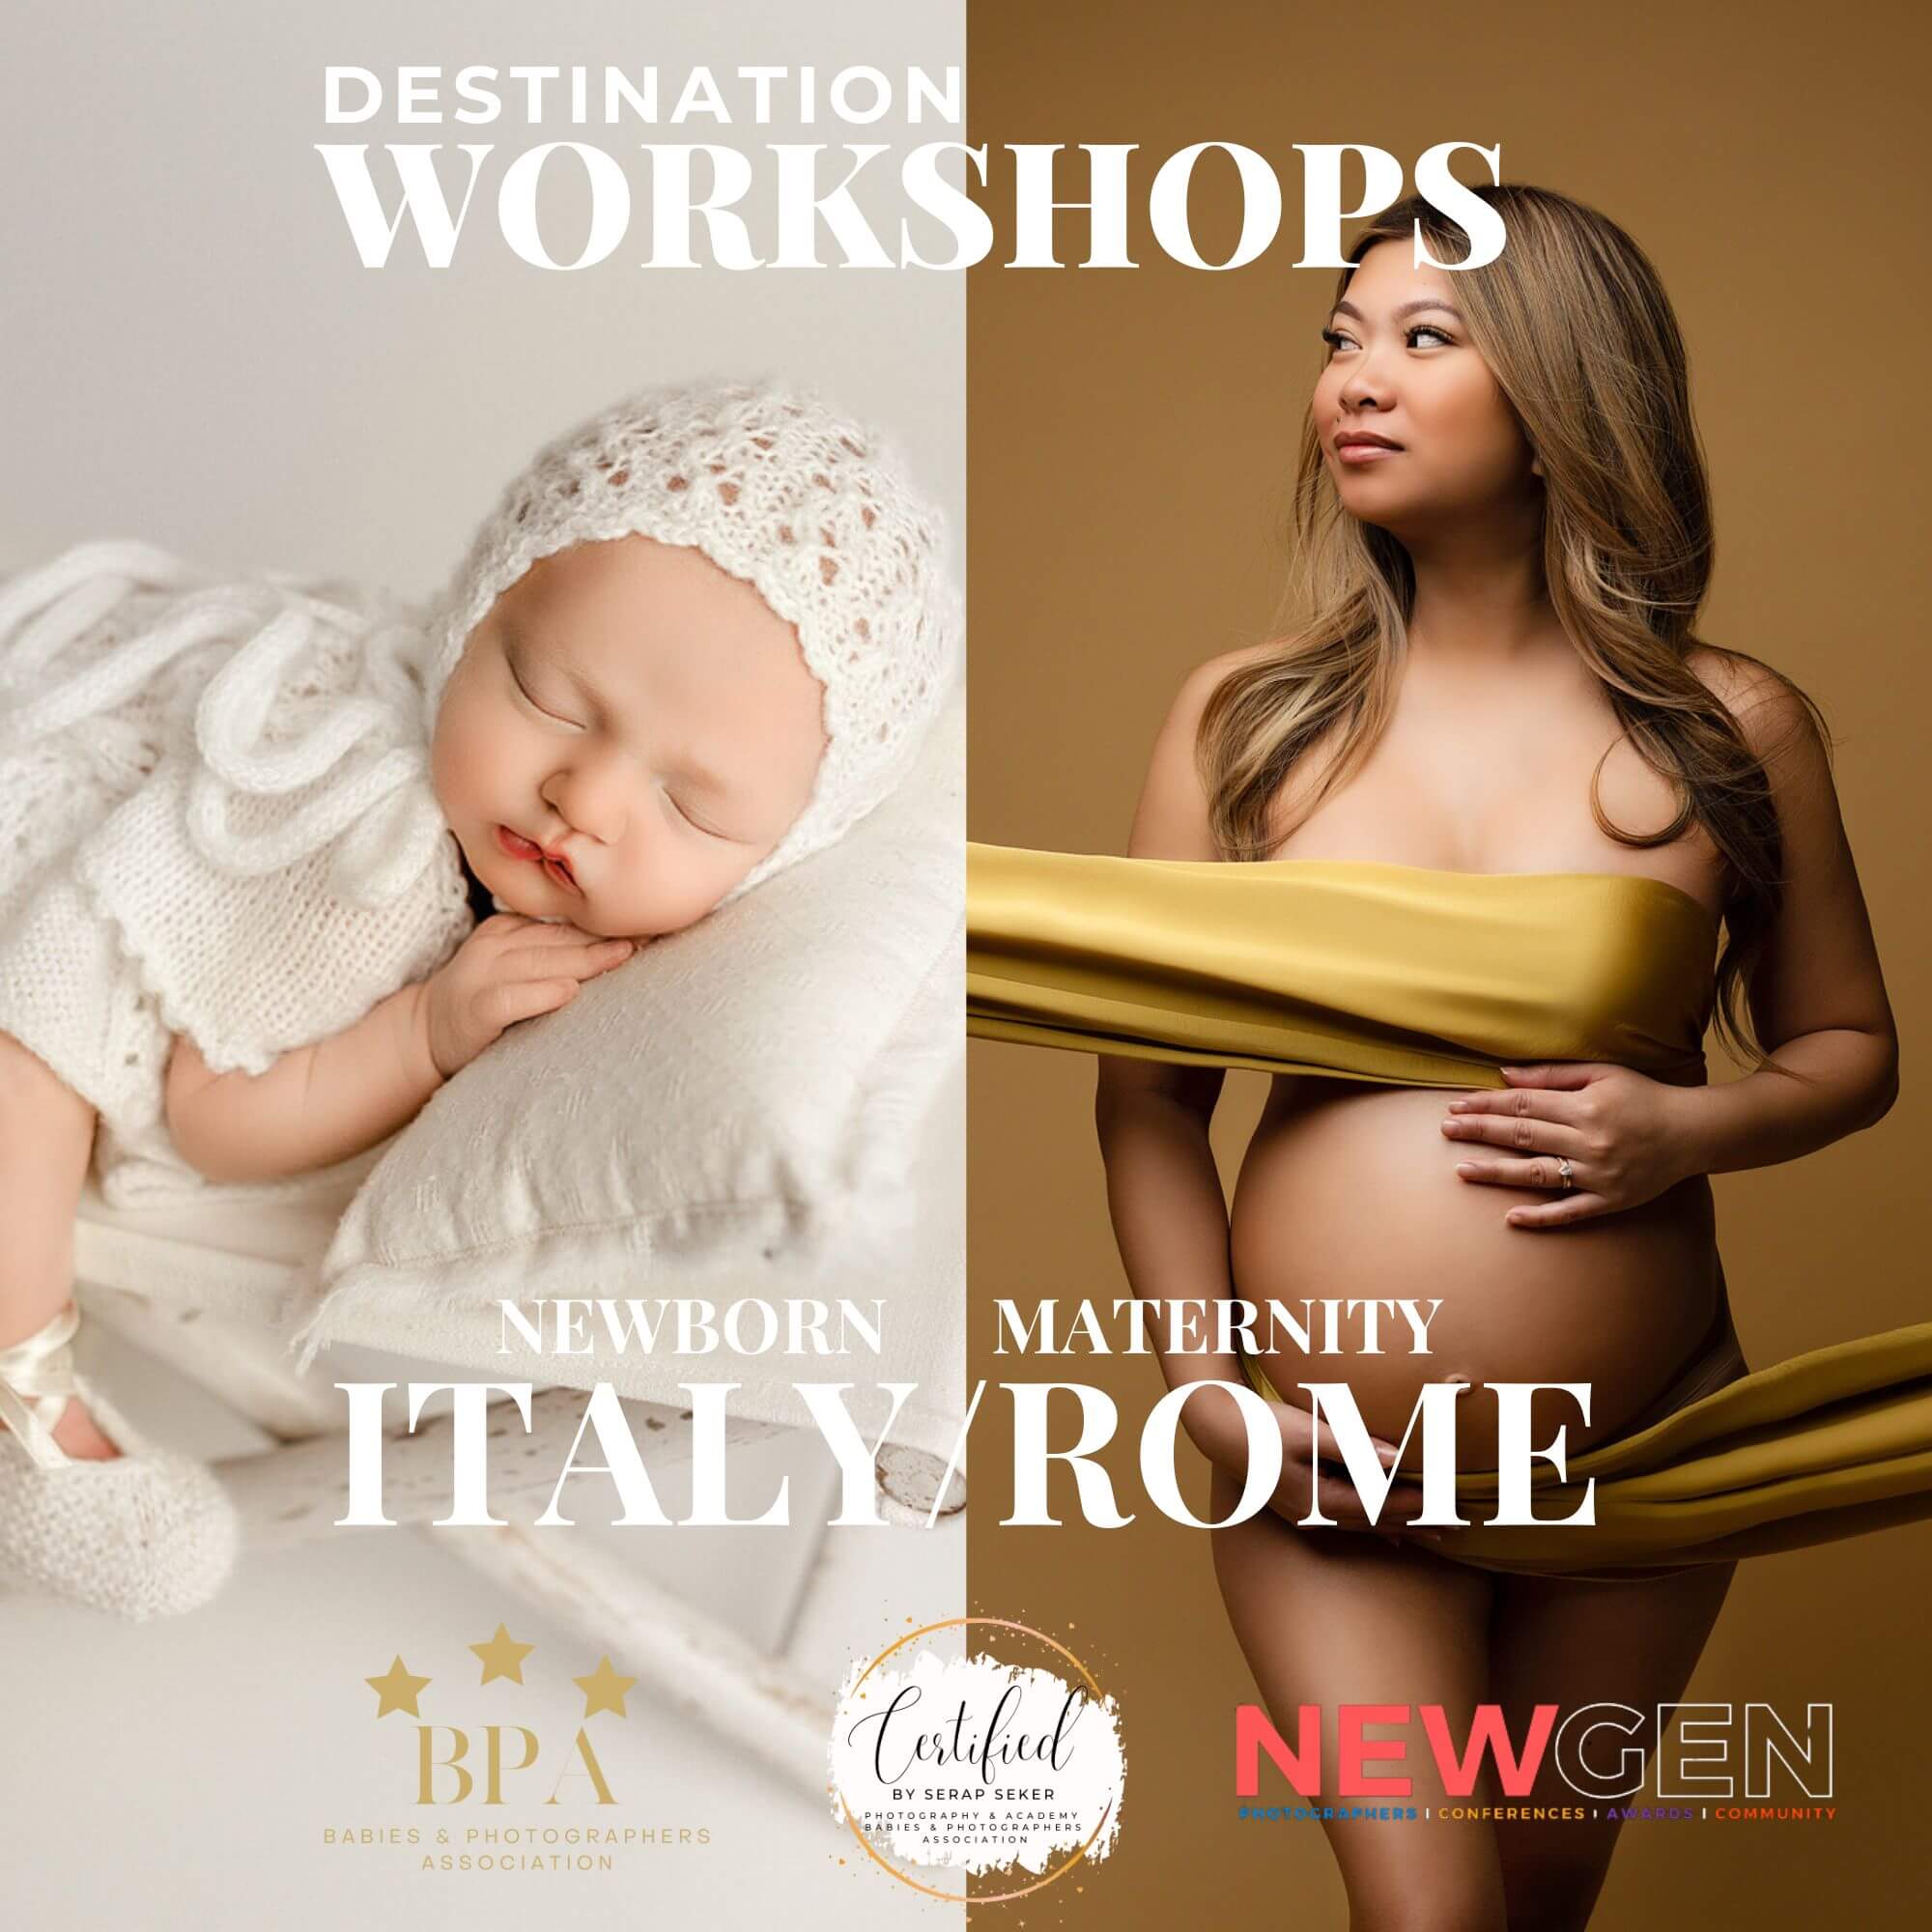 ITALY/ROME WORKSHOP